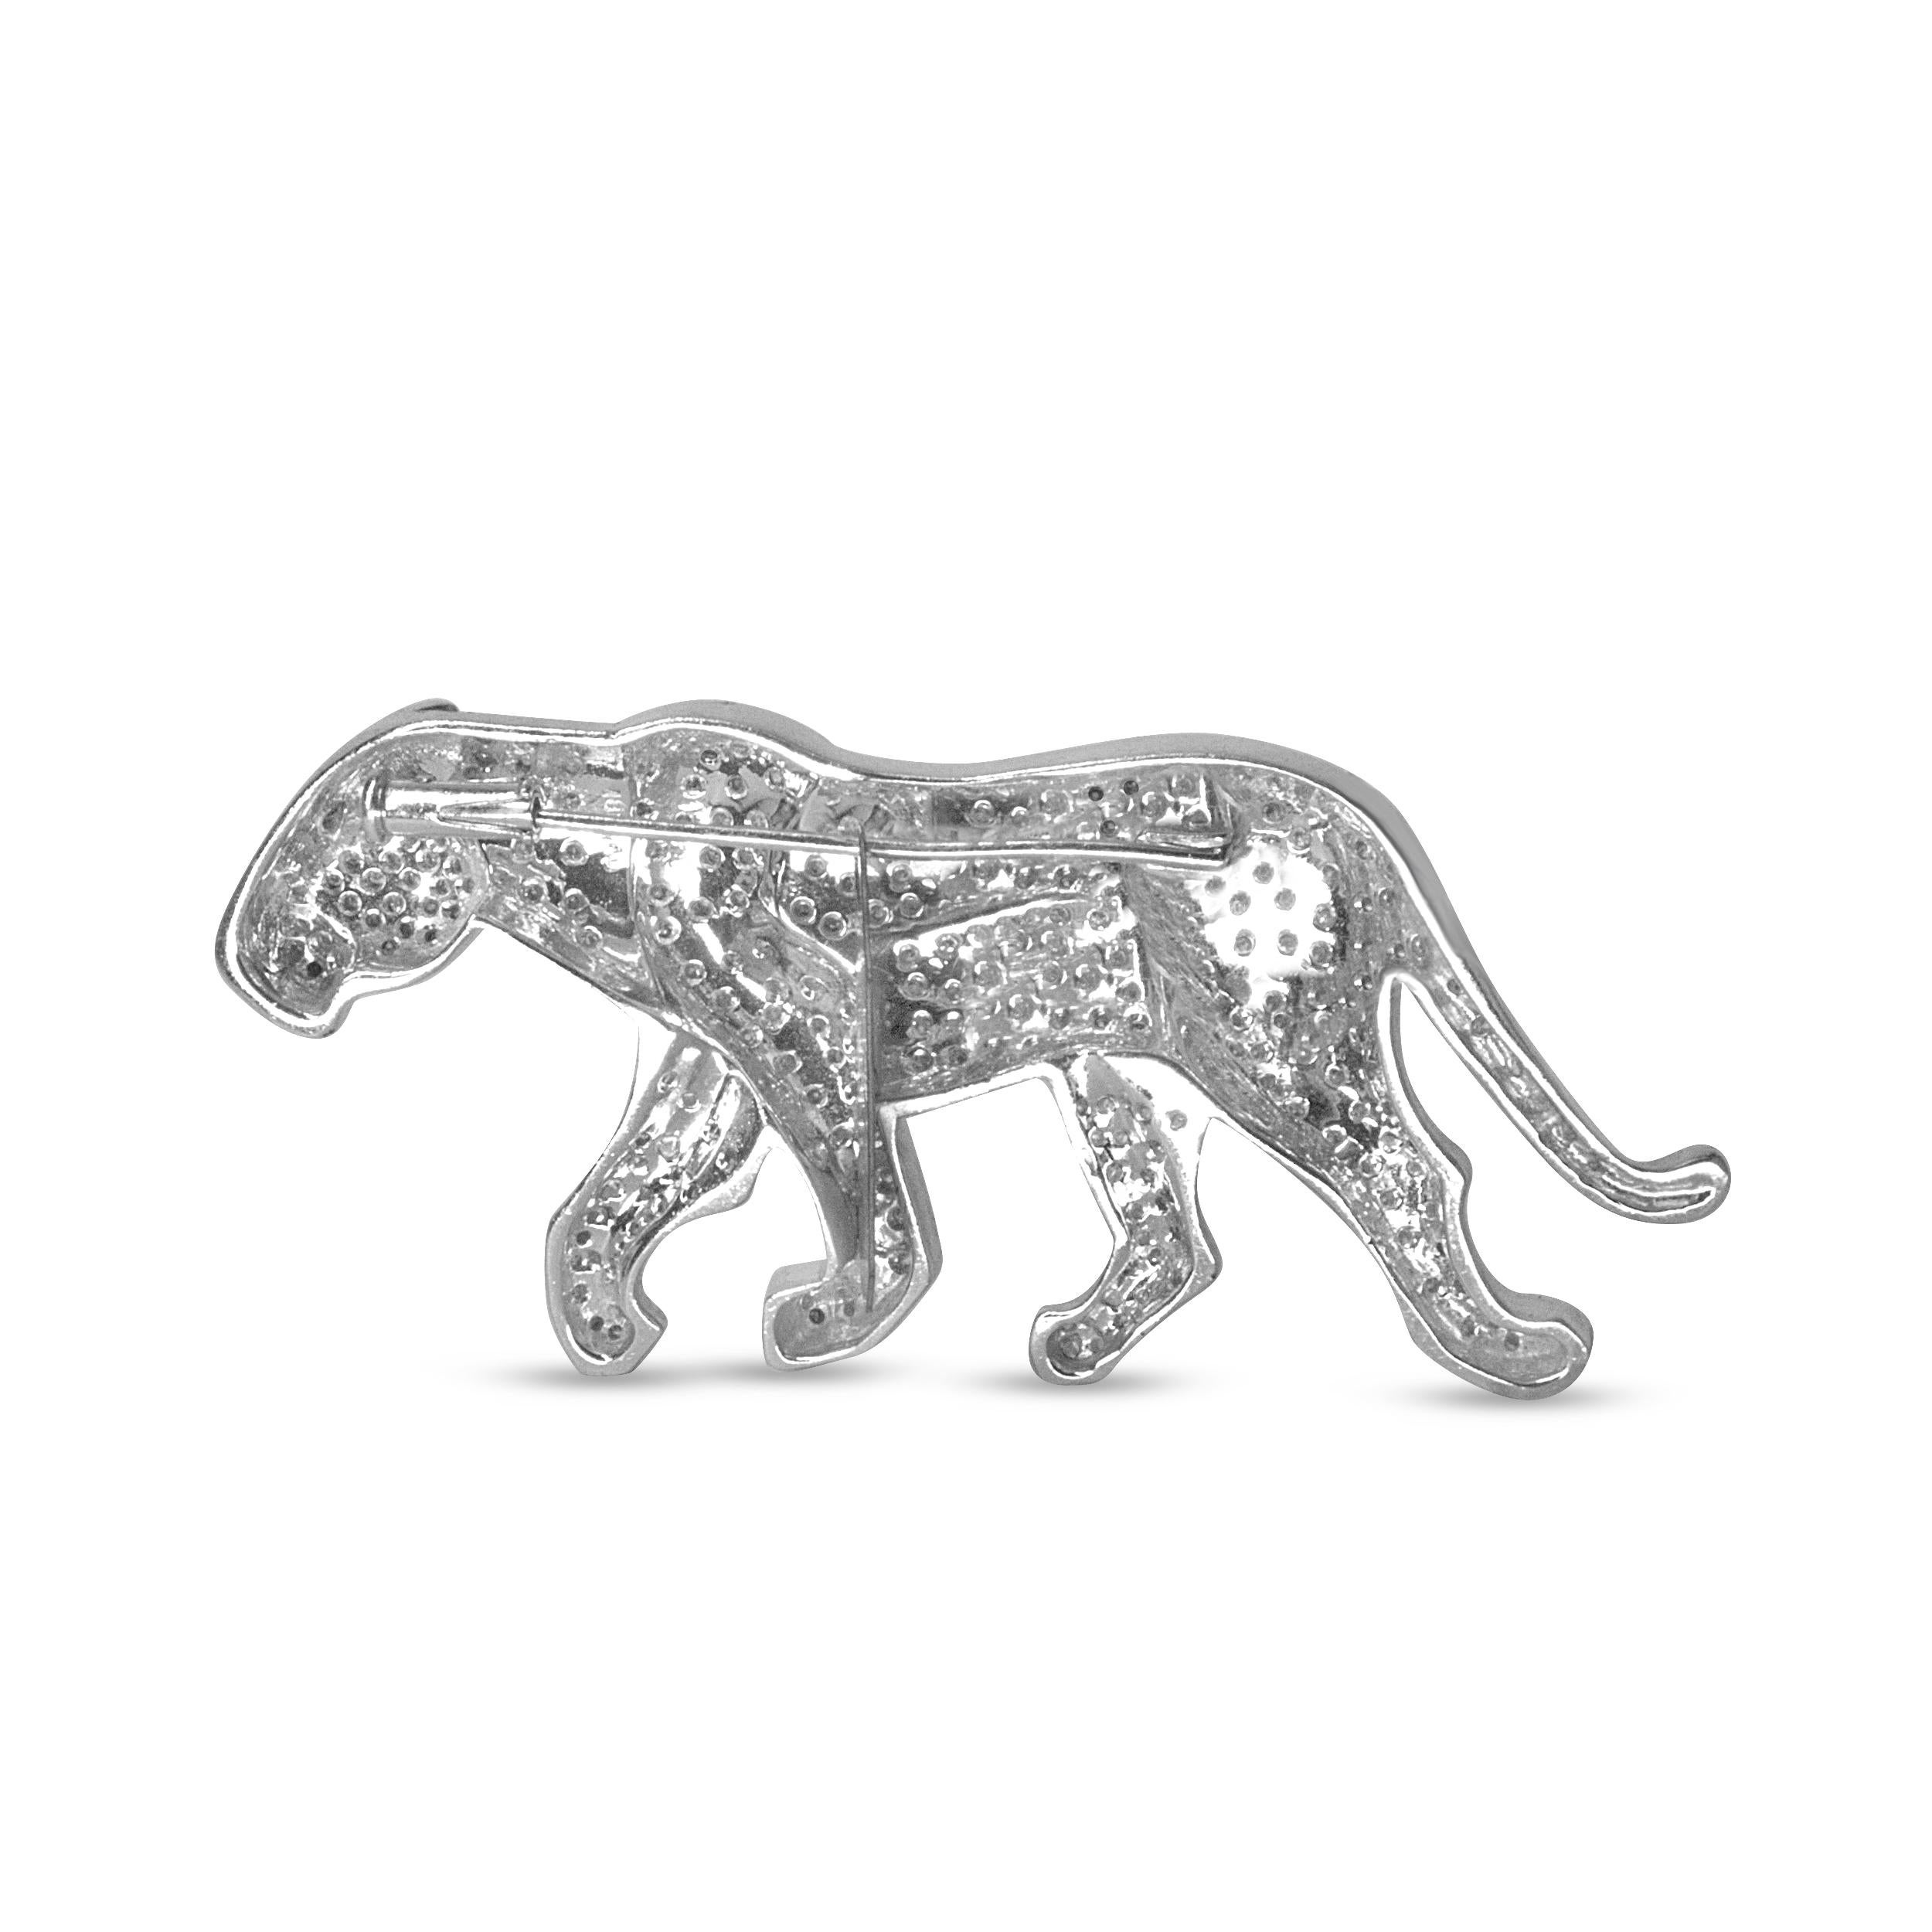 This fierce diamond brooch is set to steal the scene, crafted of genuine 18k white gold in the style of a prowling  panther with piercing 2mm round emerald eyes. The panther is a feline that has long been esteemed as a symbol of great power, grace,